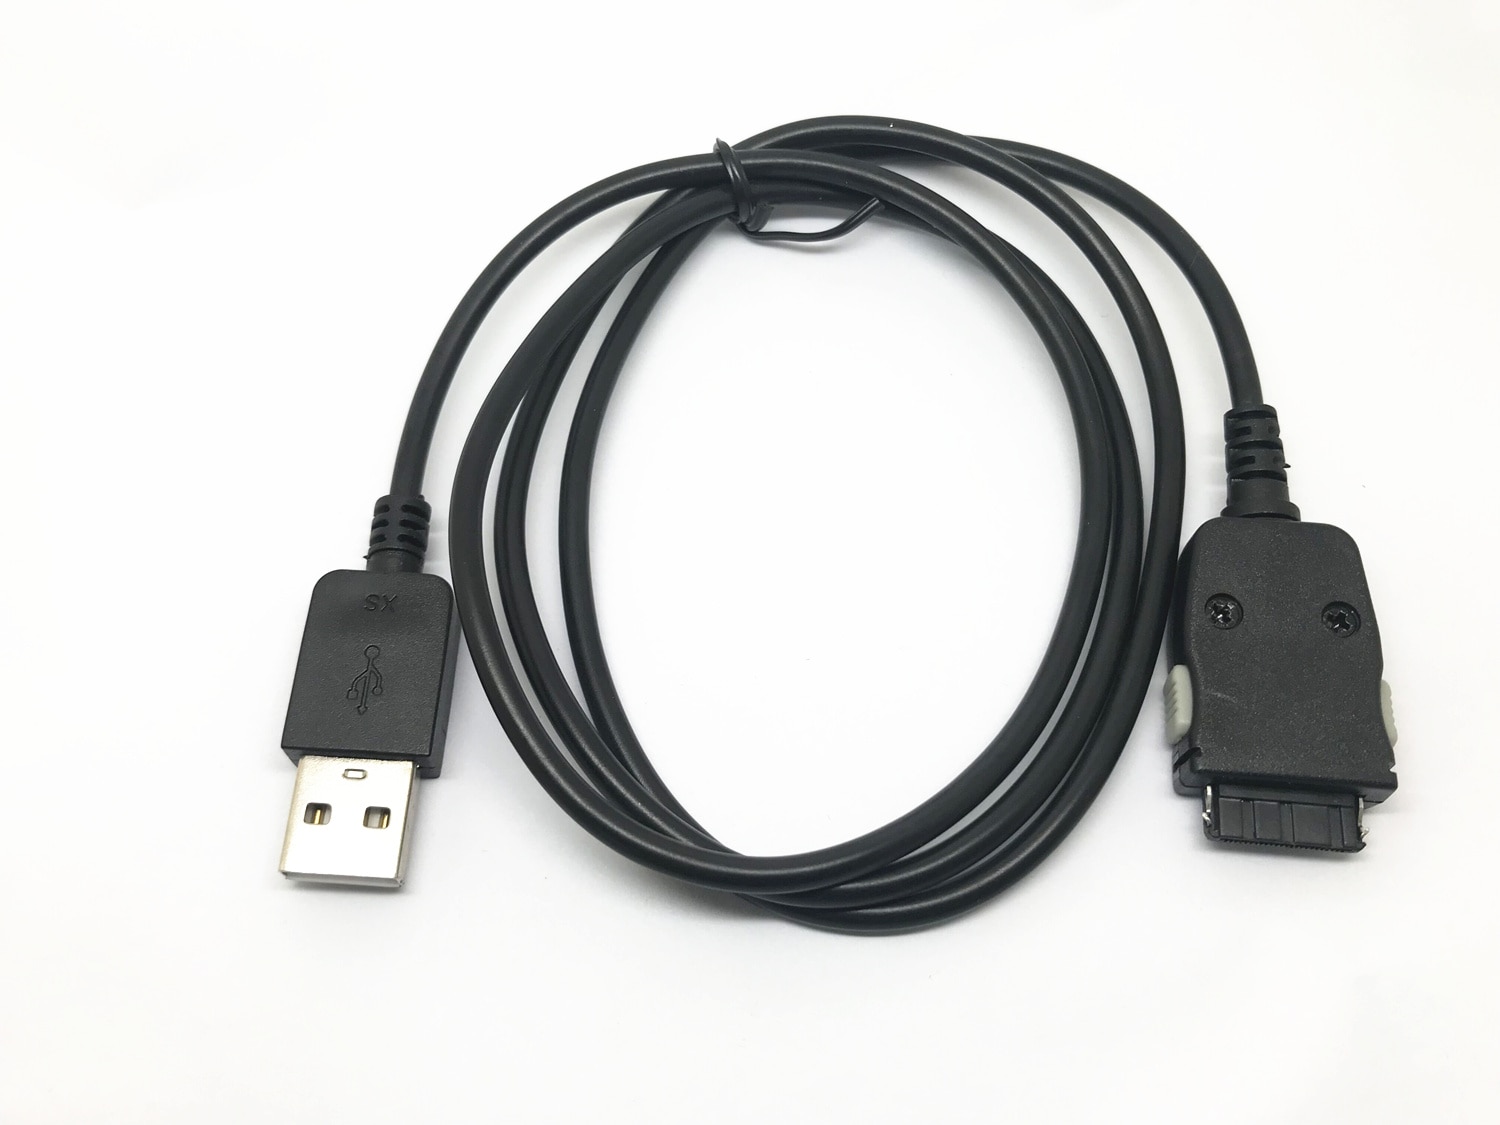 USB DATA SYNC CHARGER CABLE FOR Samsung MP3 MP4 Player YP-P2 P3 S3 S5 Q1 Q2 R1 T9 T10 T10 T08 K3 K5 E10 U10 B10 B20 D20